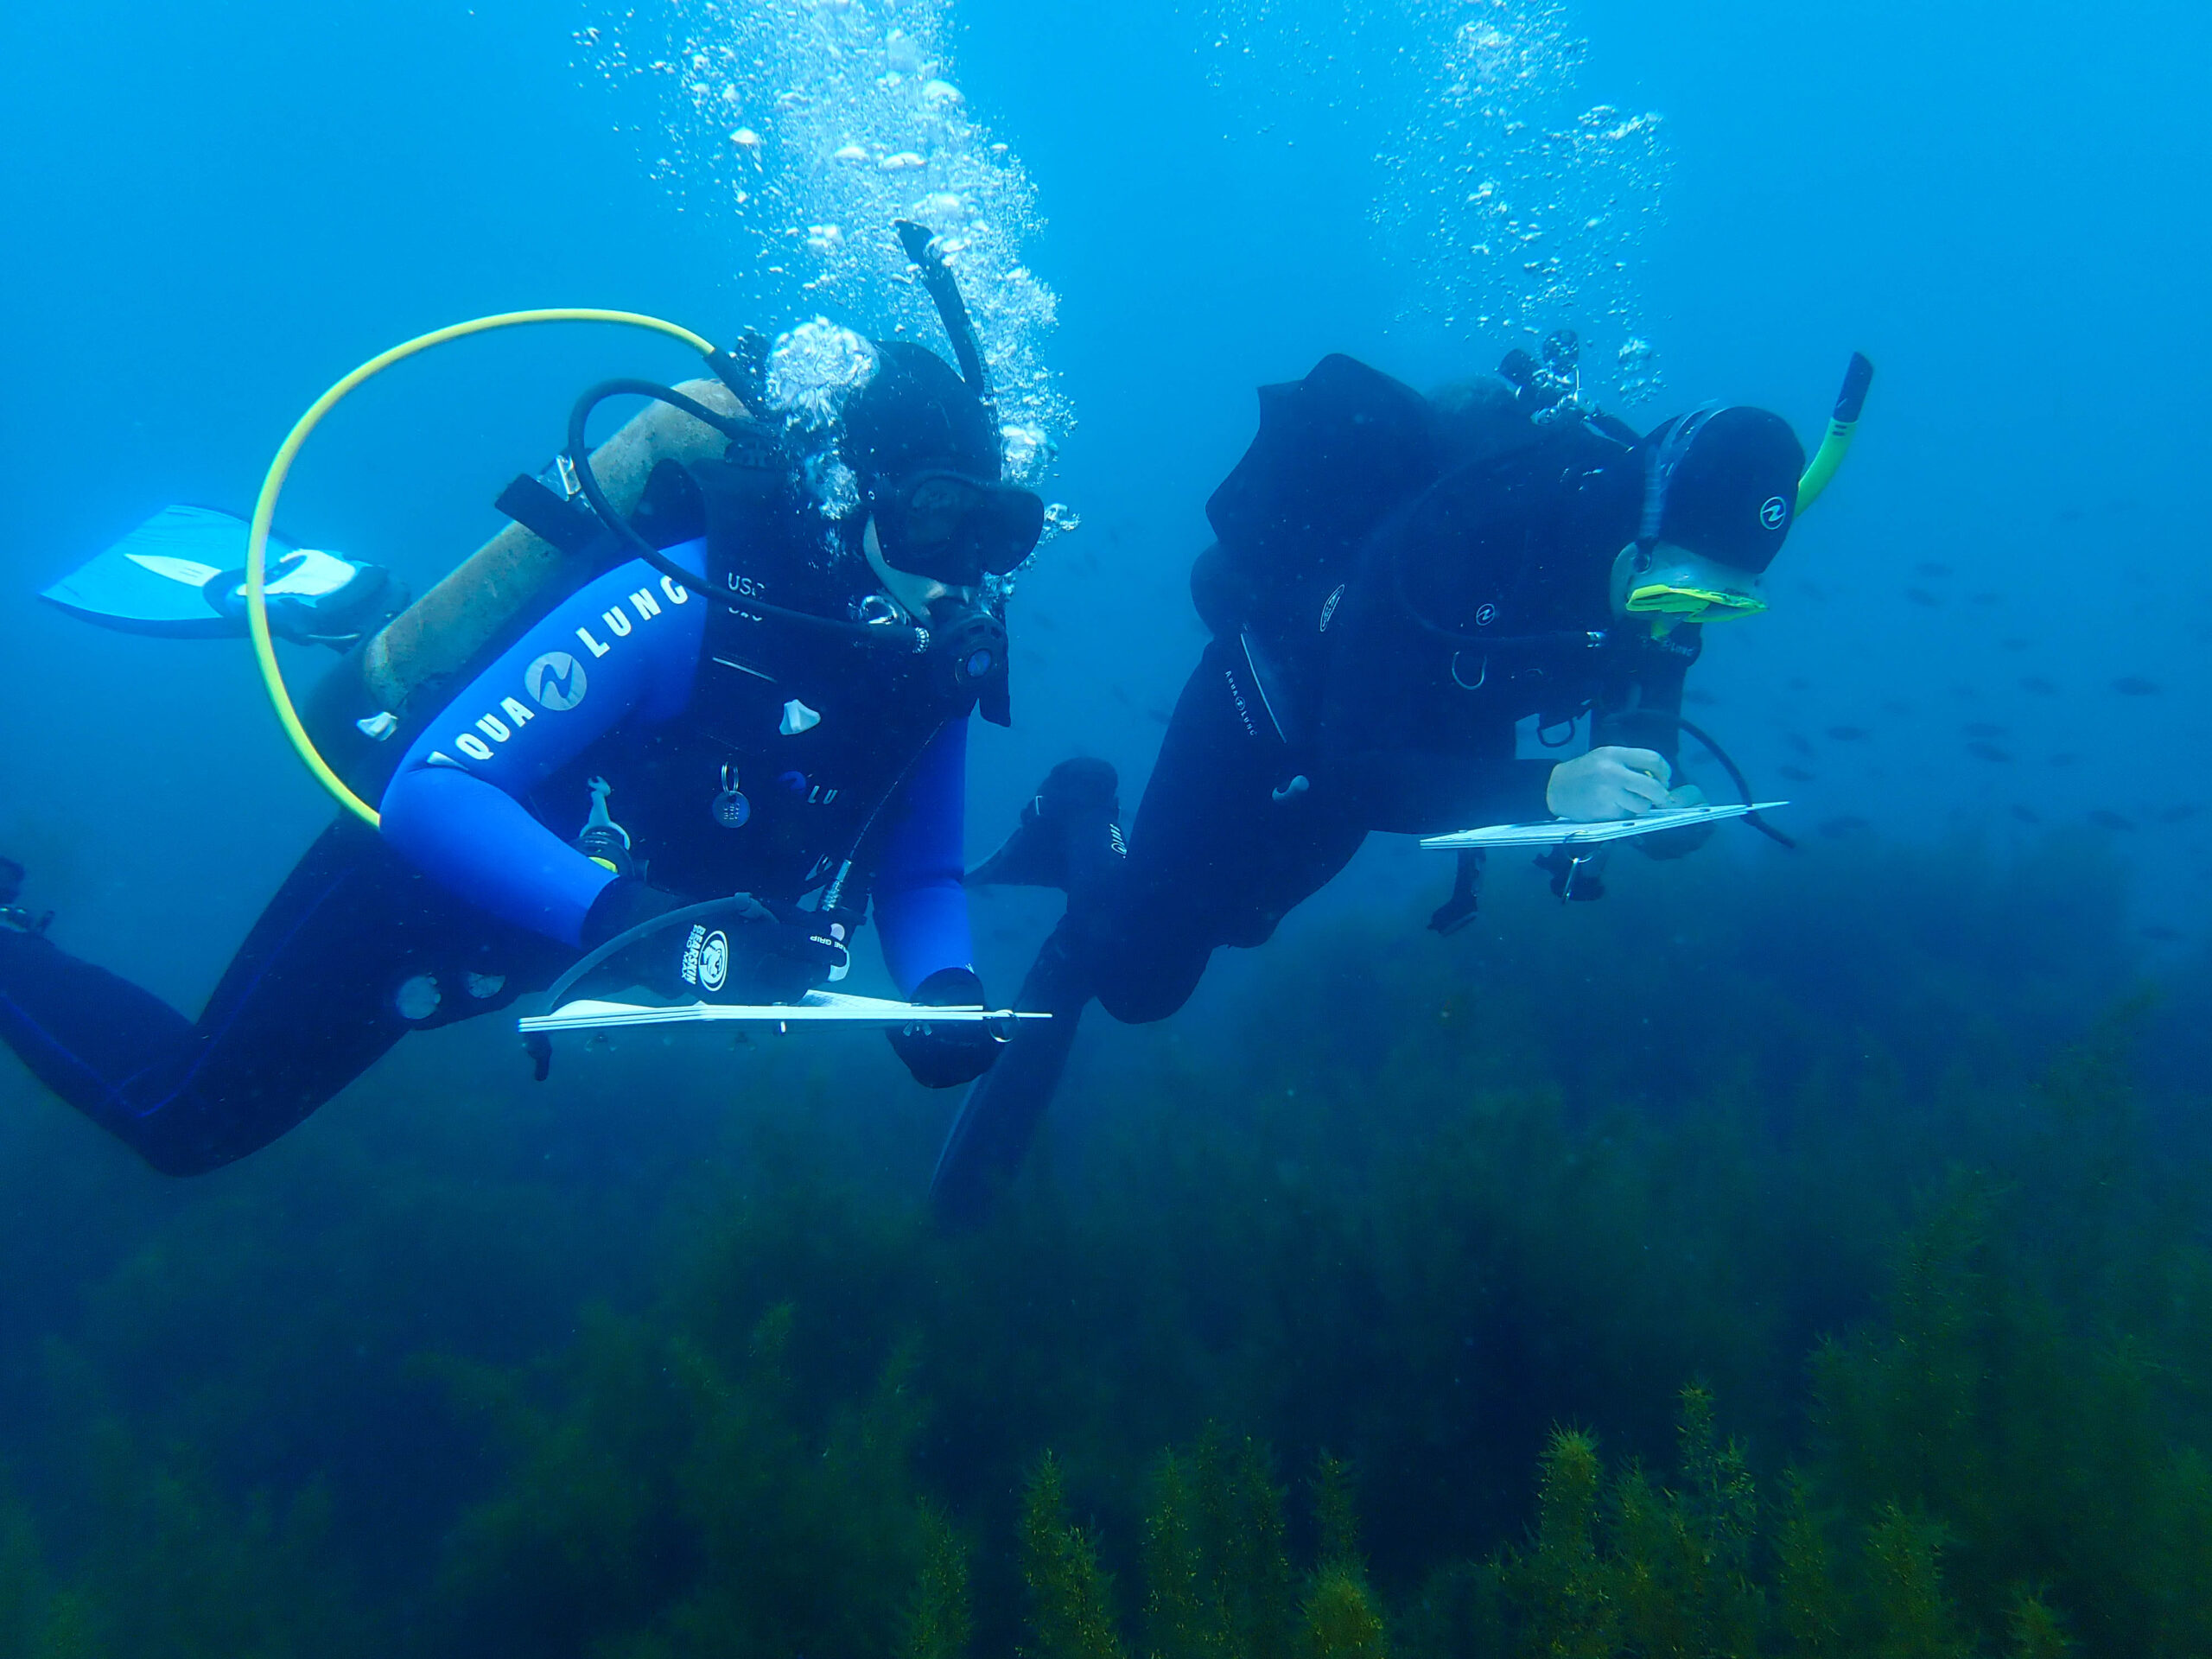 Two research divers log data on whiteboards as they swim